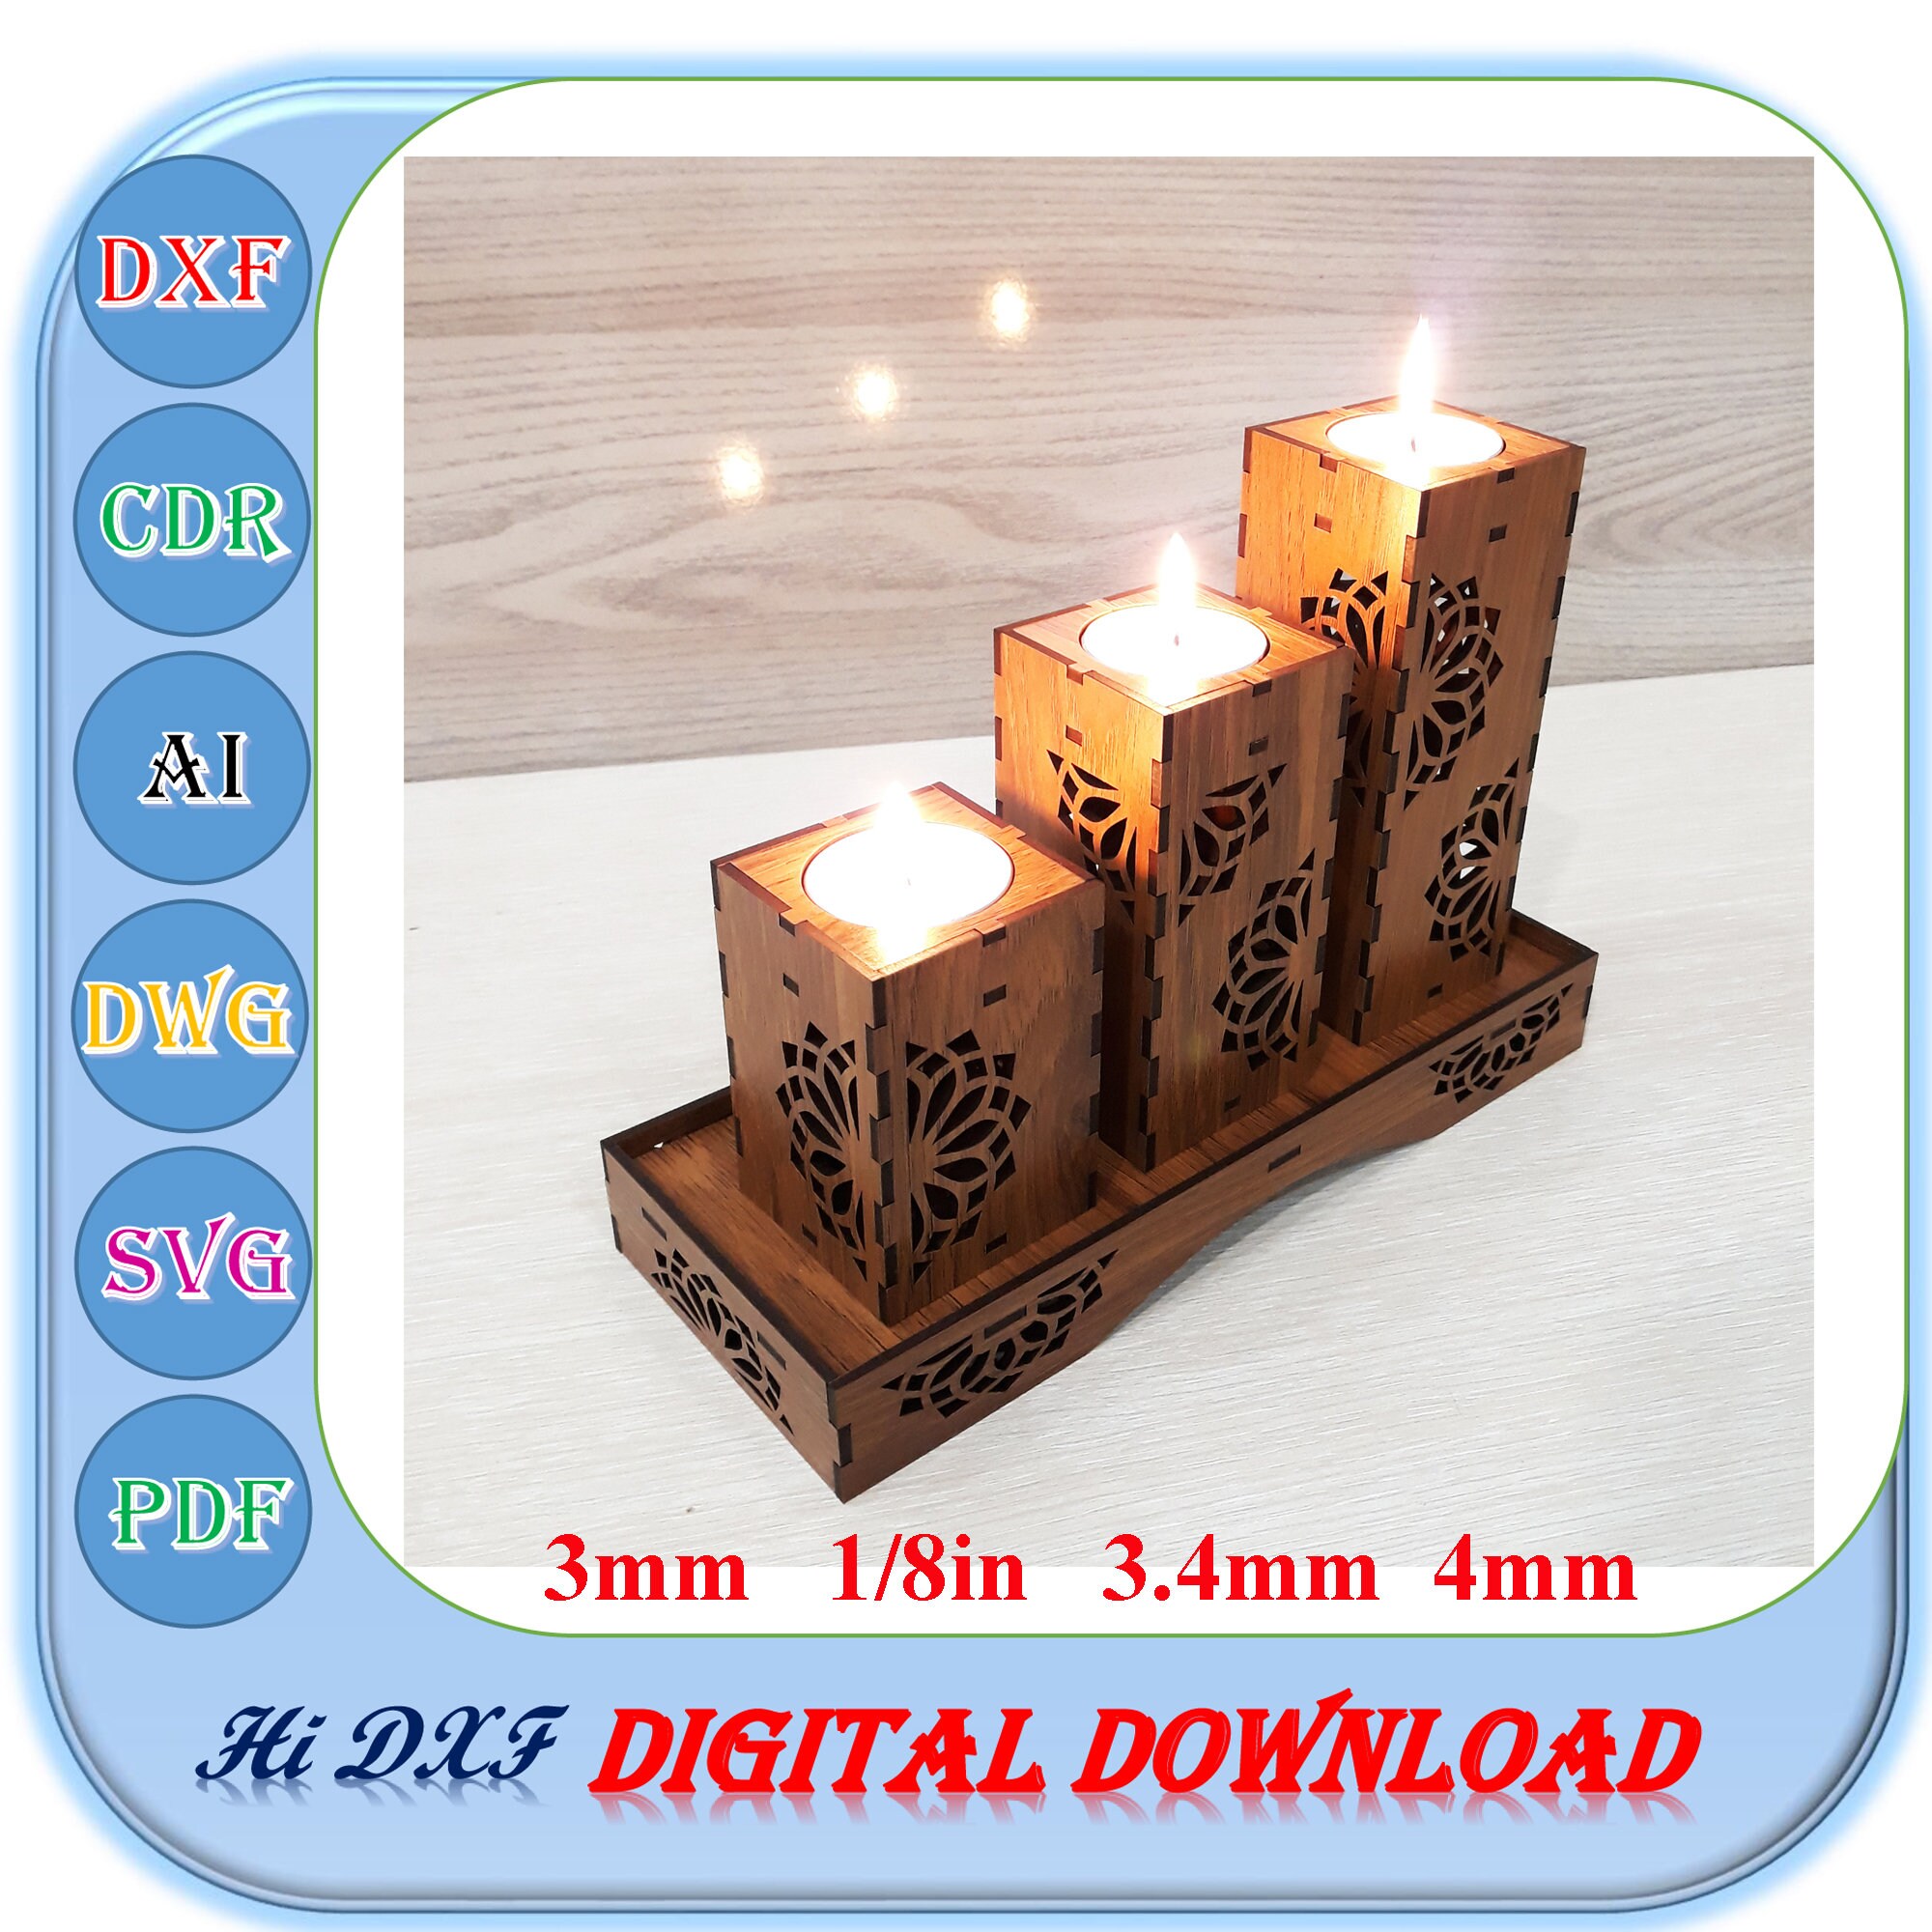 Personalized Blown Tealight Wedding Candle Glass Holder